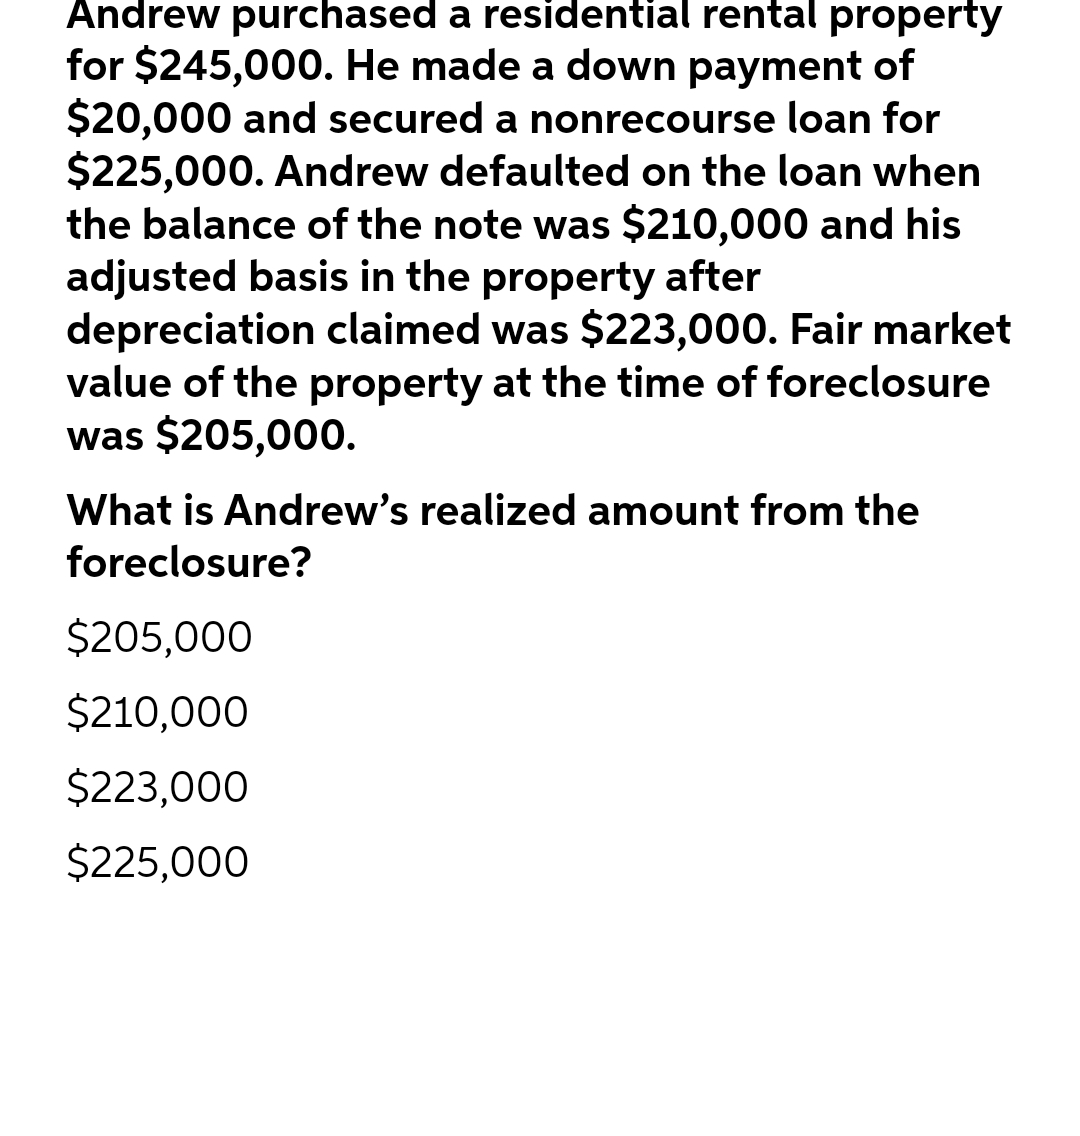 Andrew purchased a residential rental property
for $245,000. He made a down payment of
$20,000 and secured a nonrecourse loan for
$225,000. Andrew defaulted on the loan when
the balance of the note was $210,000 and his
adjusted basis in the property after
depreciation claimed was $223,000. Fair market
value of the property at the time of foreclosure
was $205,000.
What is Andrew's realized amount from the
foreclosure?
$205,000
$210,000
$223,000
$225,000